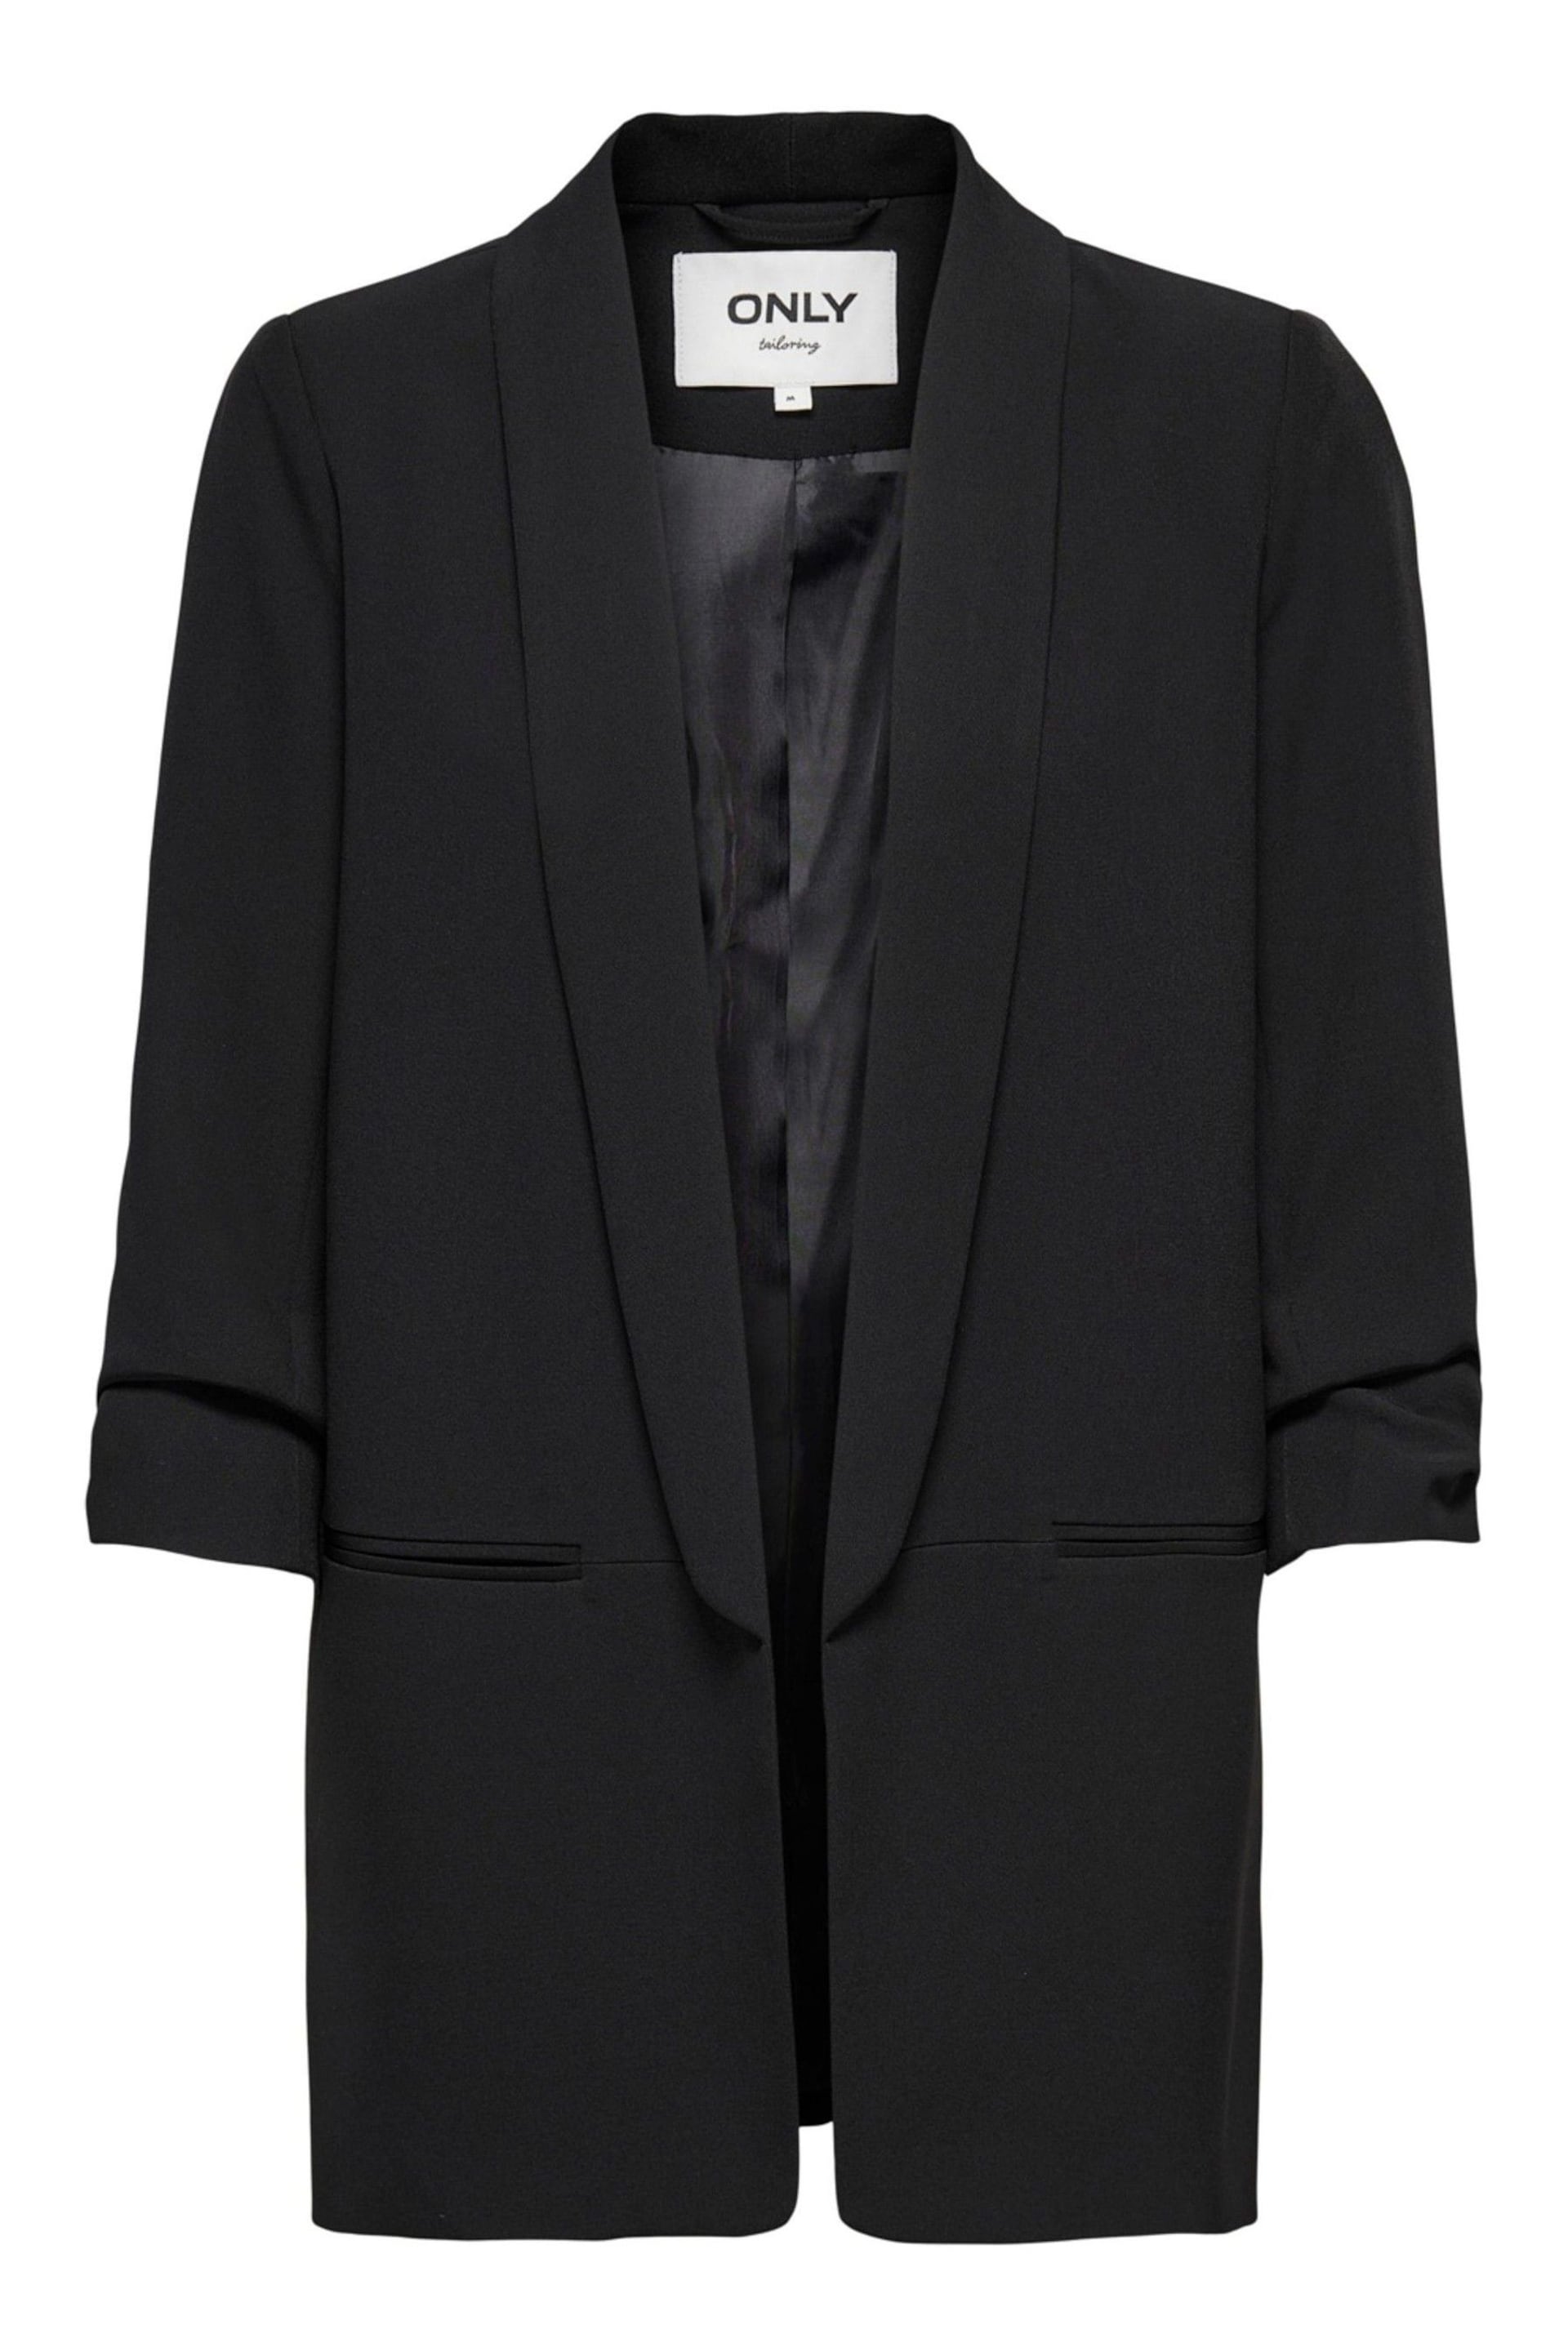 ONLY Black Ruched Sleeve Workwear Blazer - Image 5 of 5